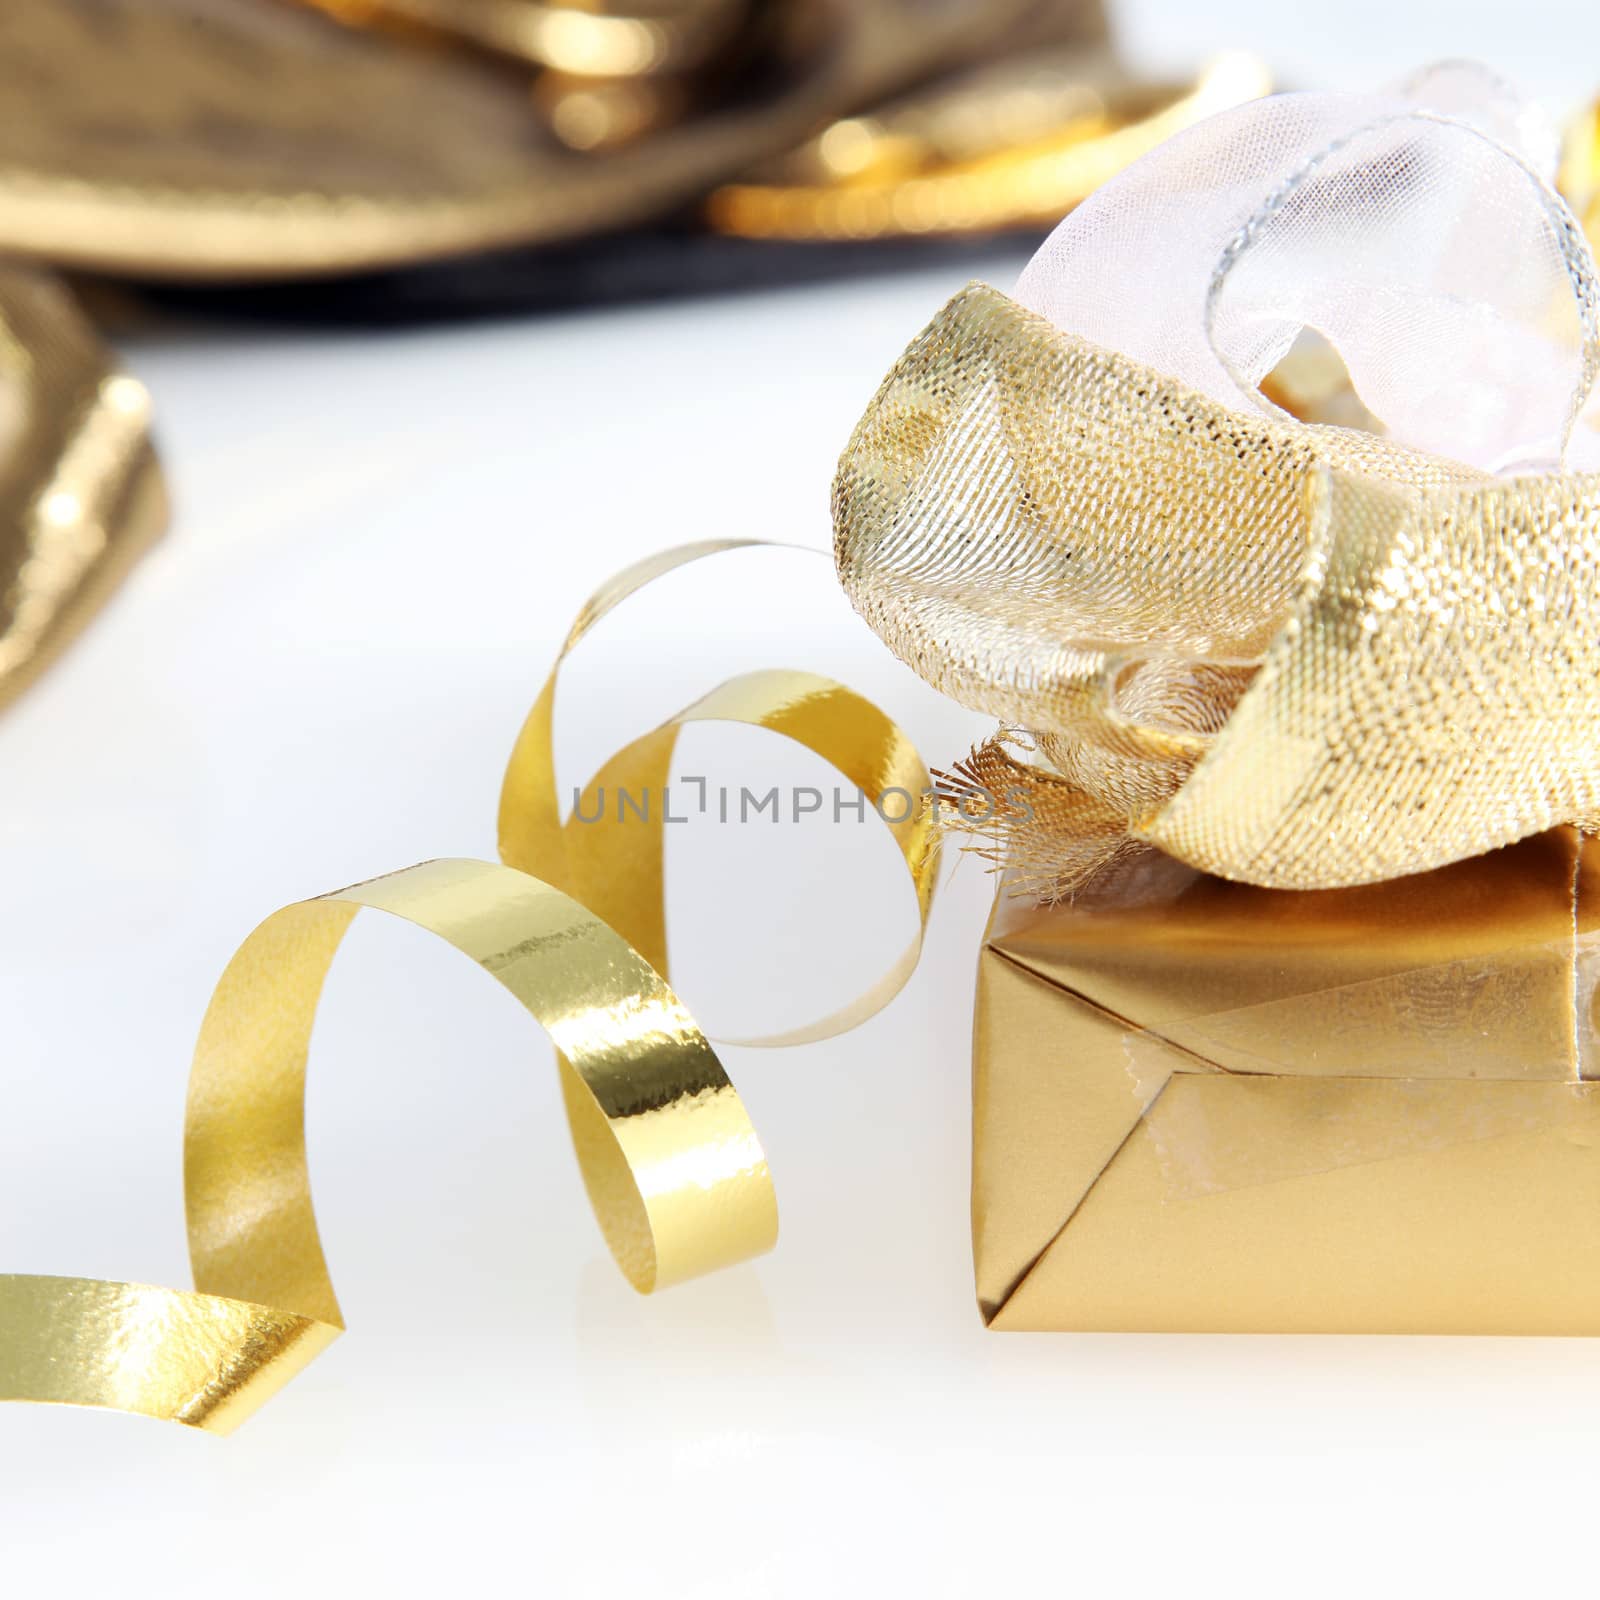 Pretty gold wrapped gift and twirled ribbon by Farina6000